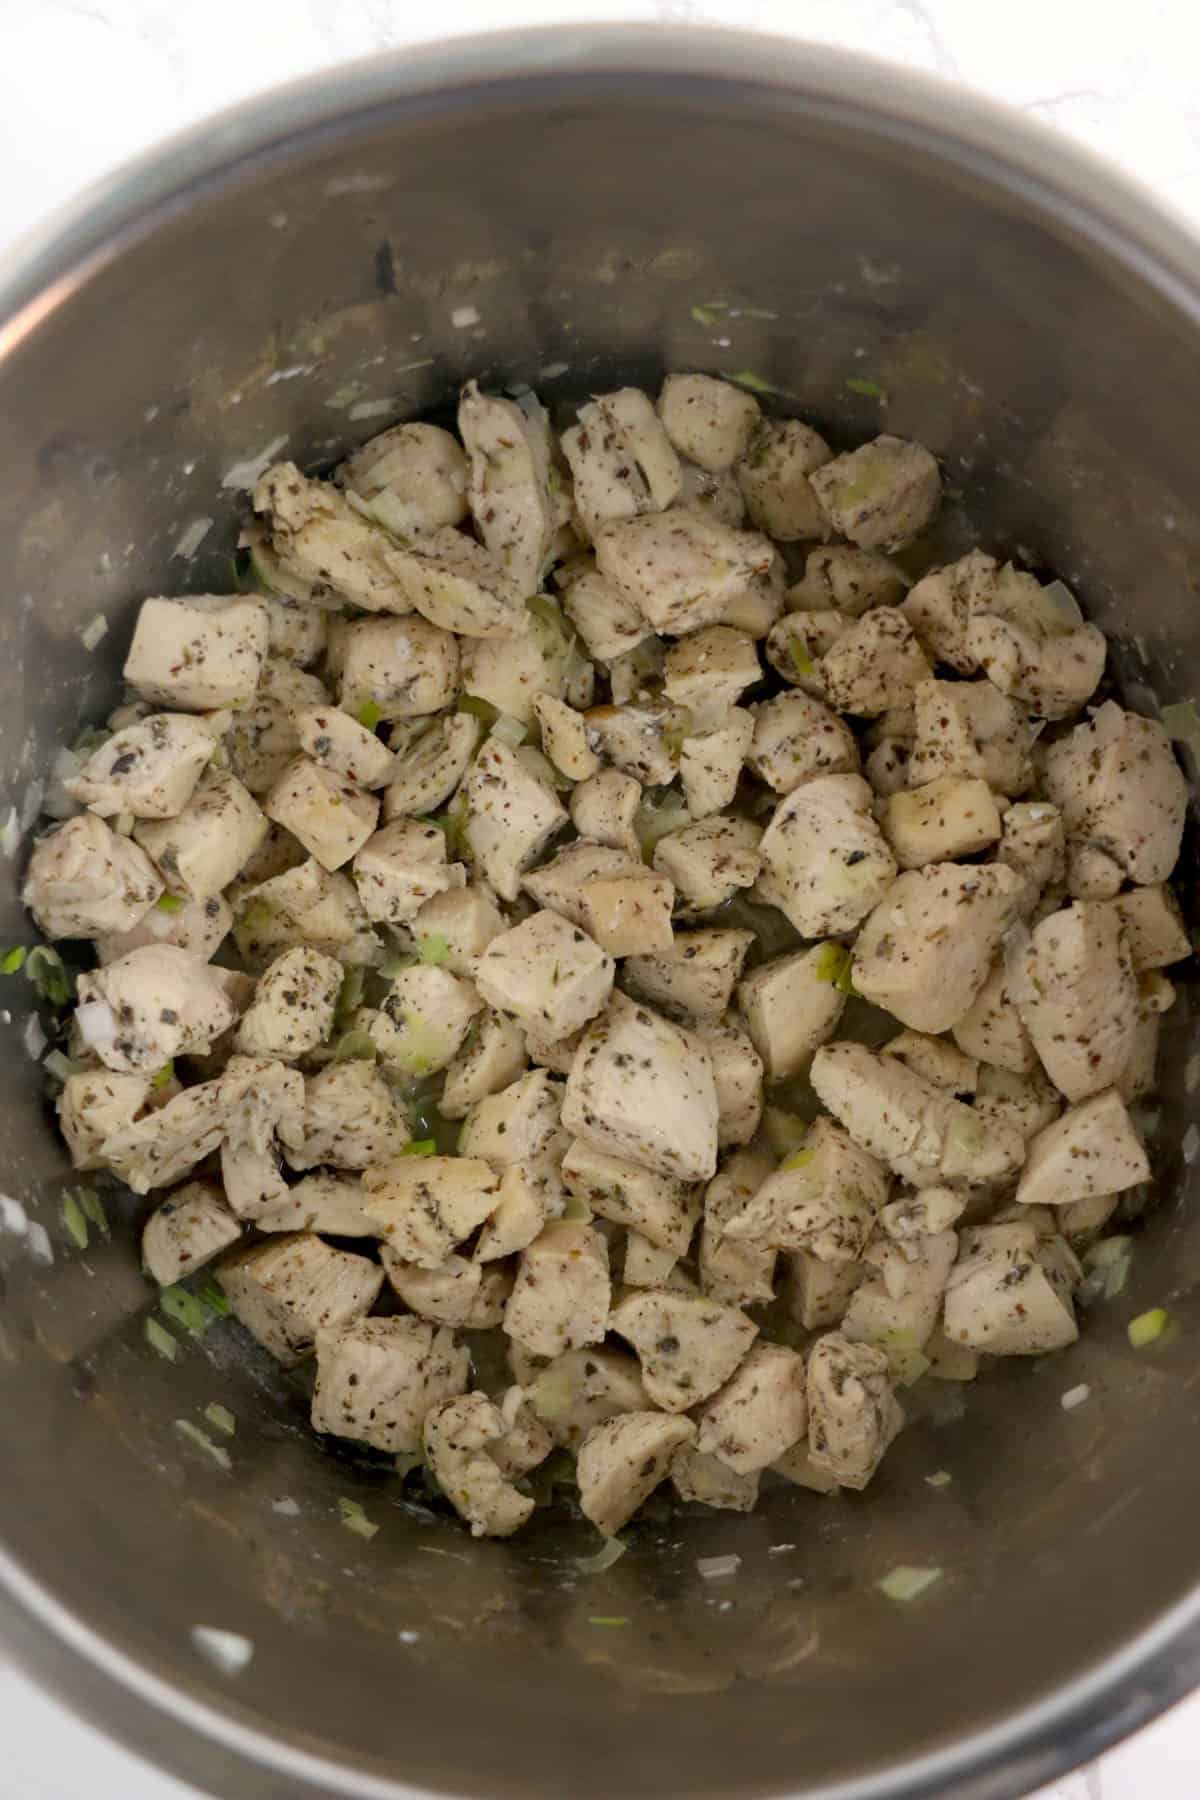 Seared chicken pieces in an Instant Pot.